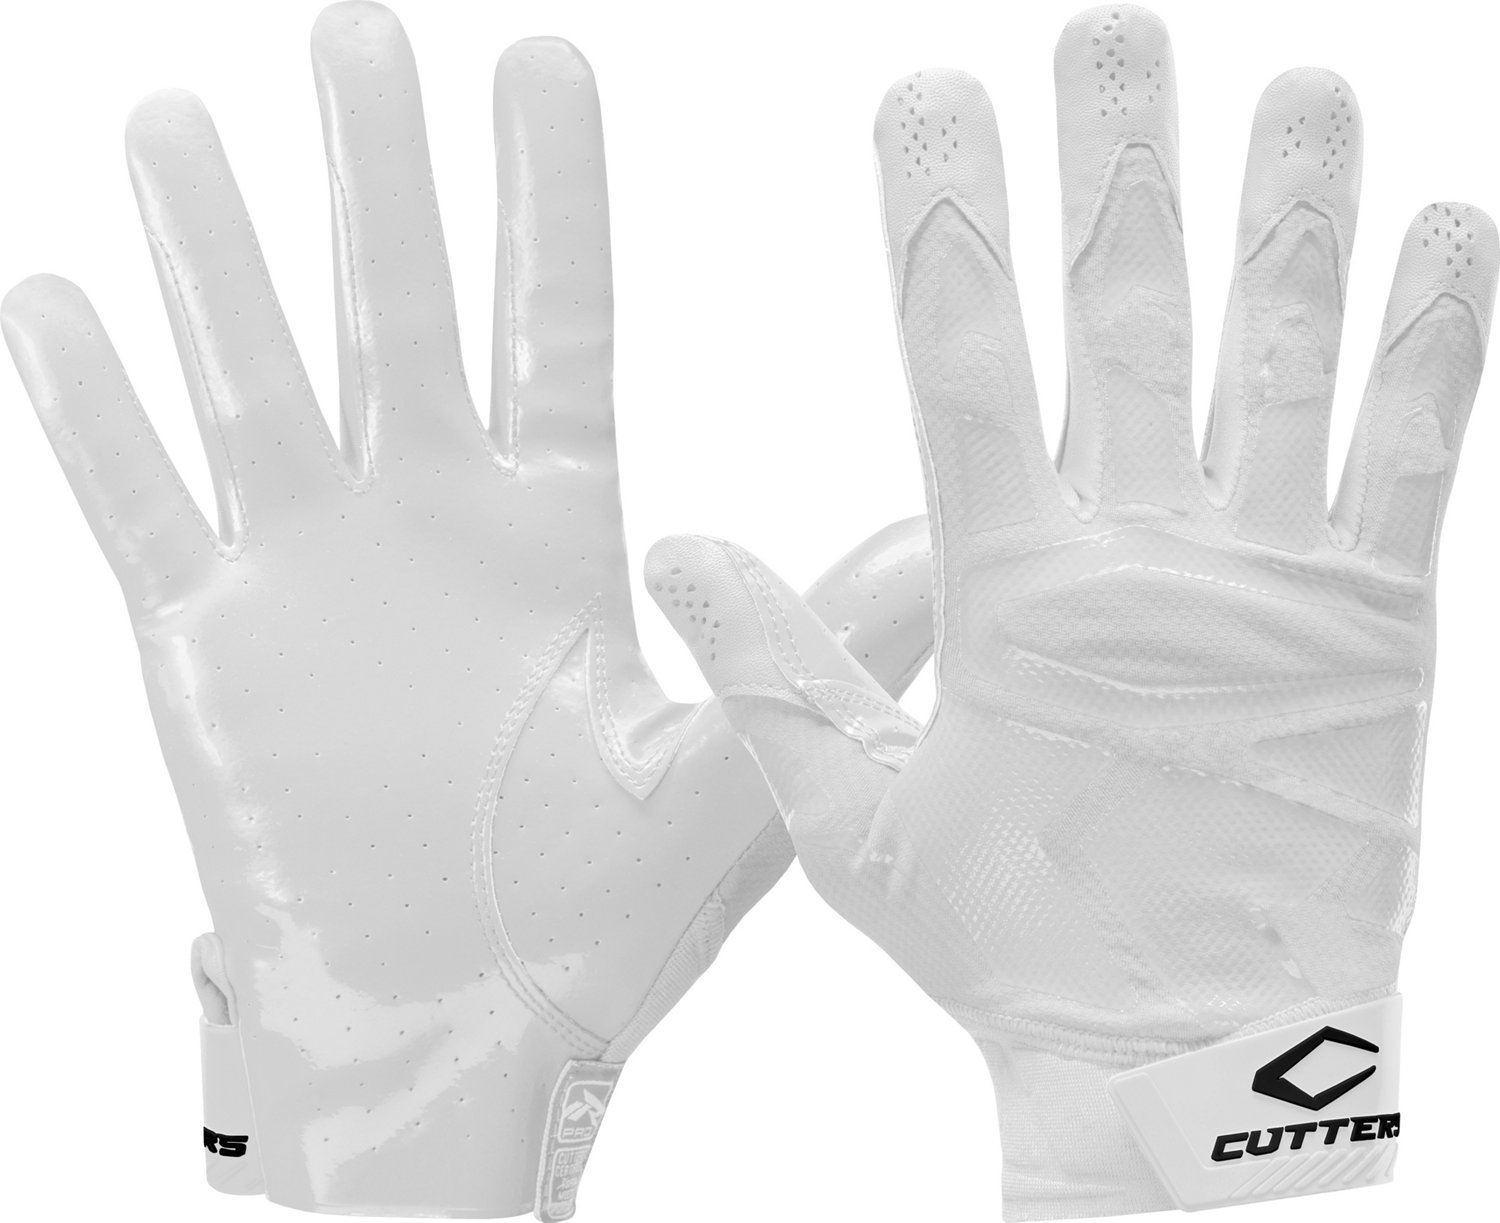 Cutters Gloves REV S250 